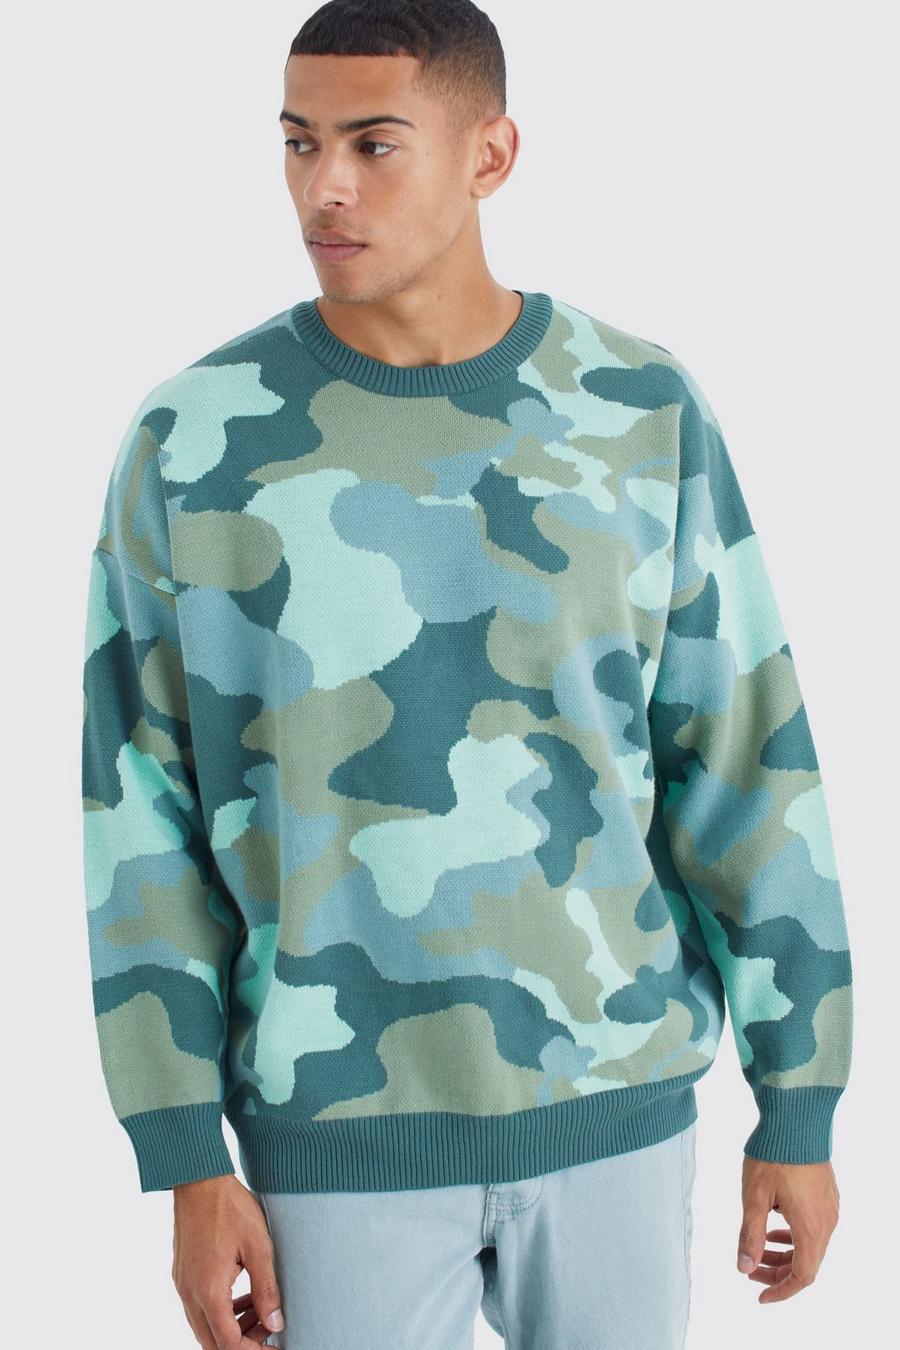 Teal Oversized Camo Print Distresed Knit Jumper image number 1